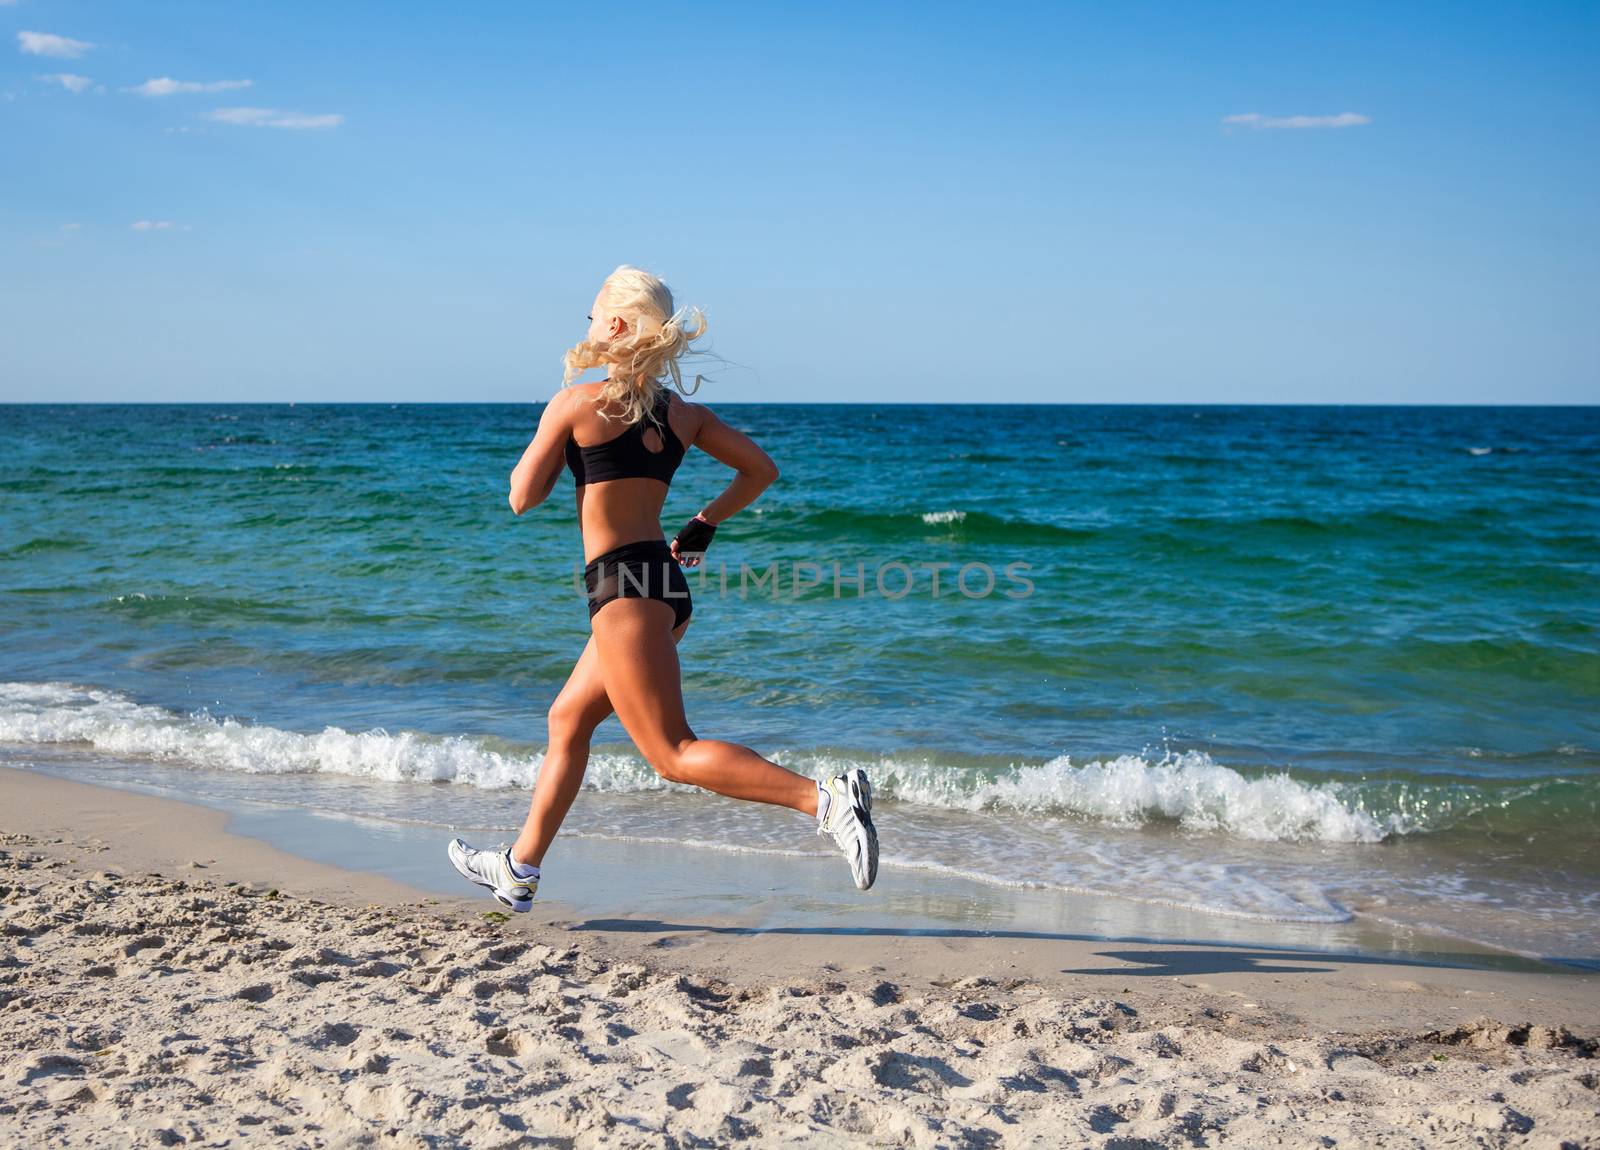 Running woman. Female runner jogging during outdoor workout on beach